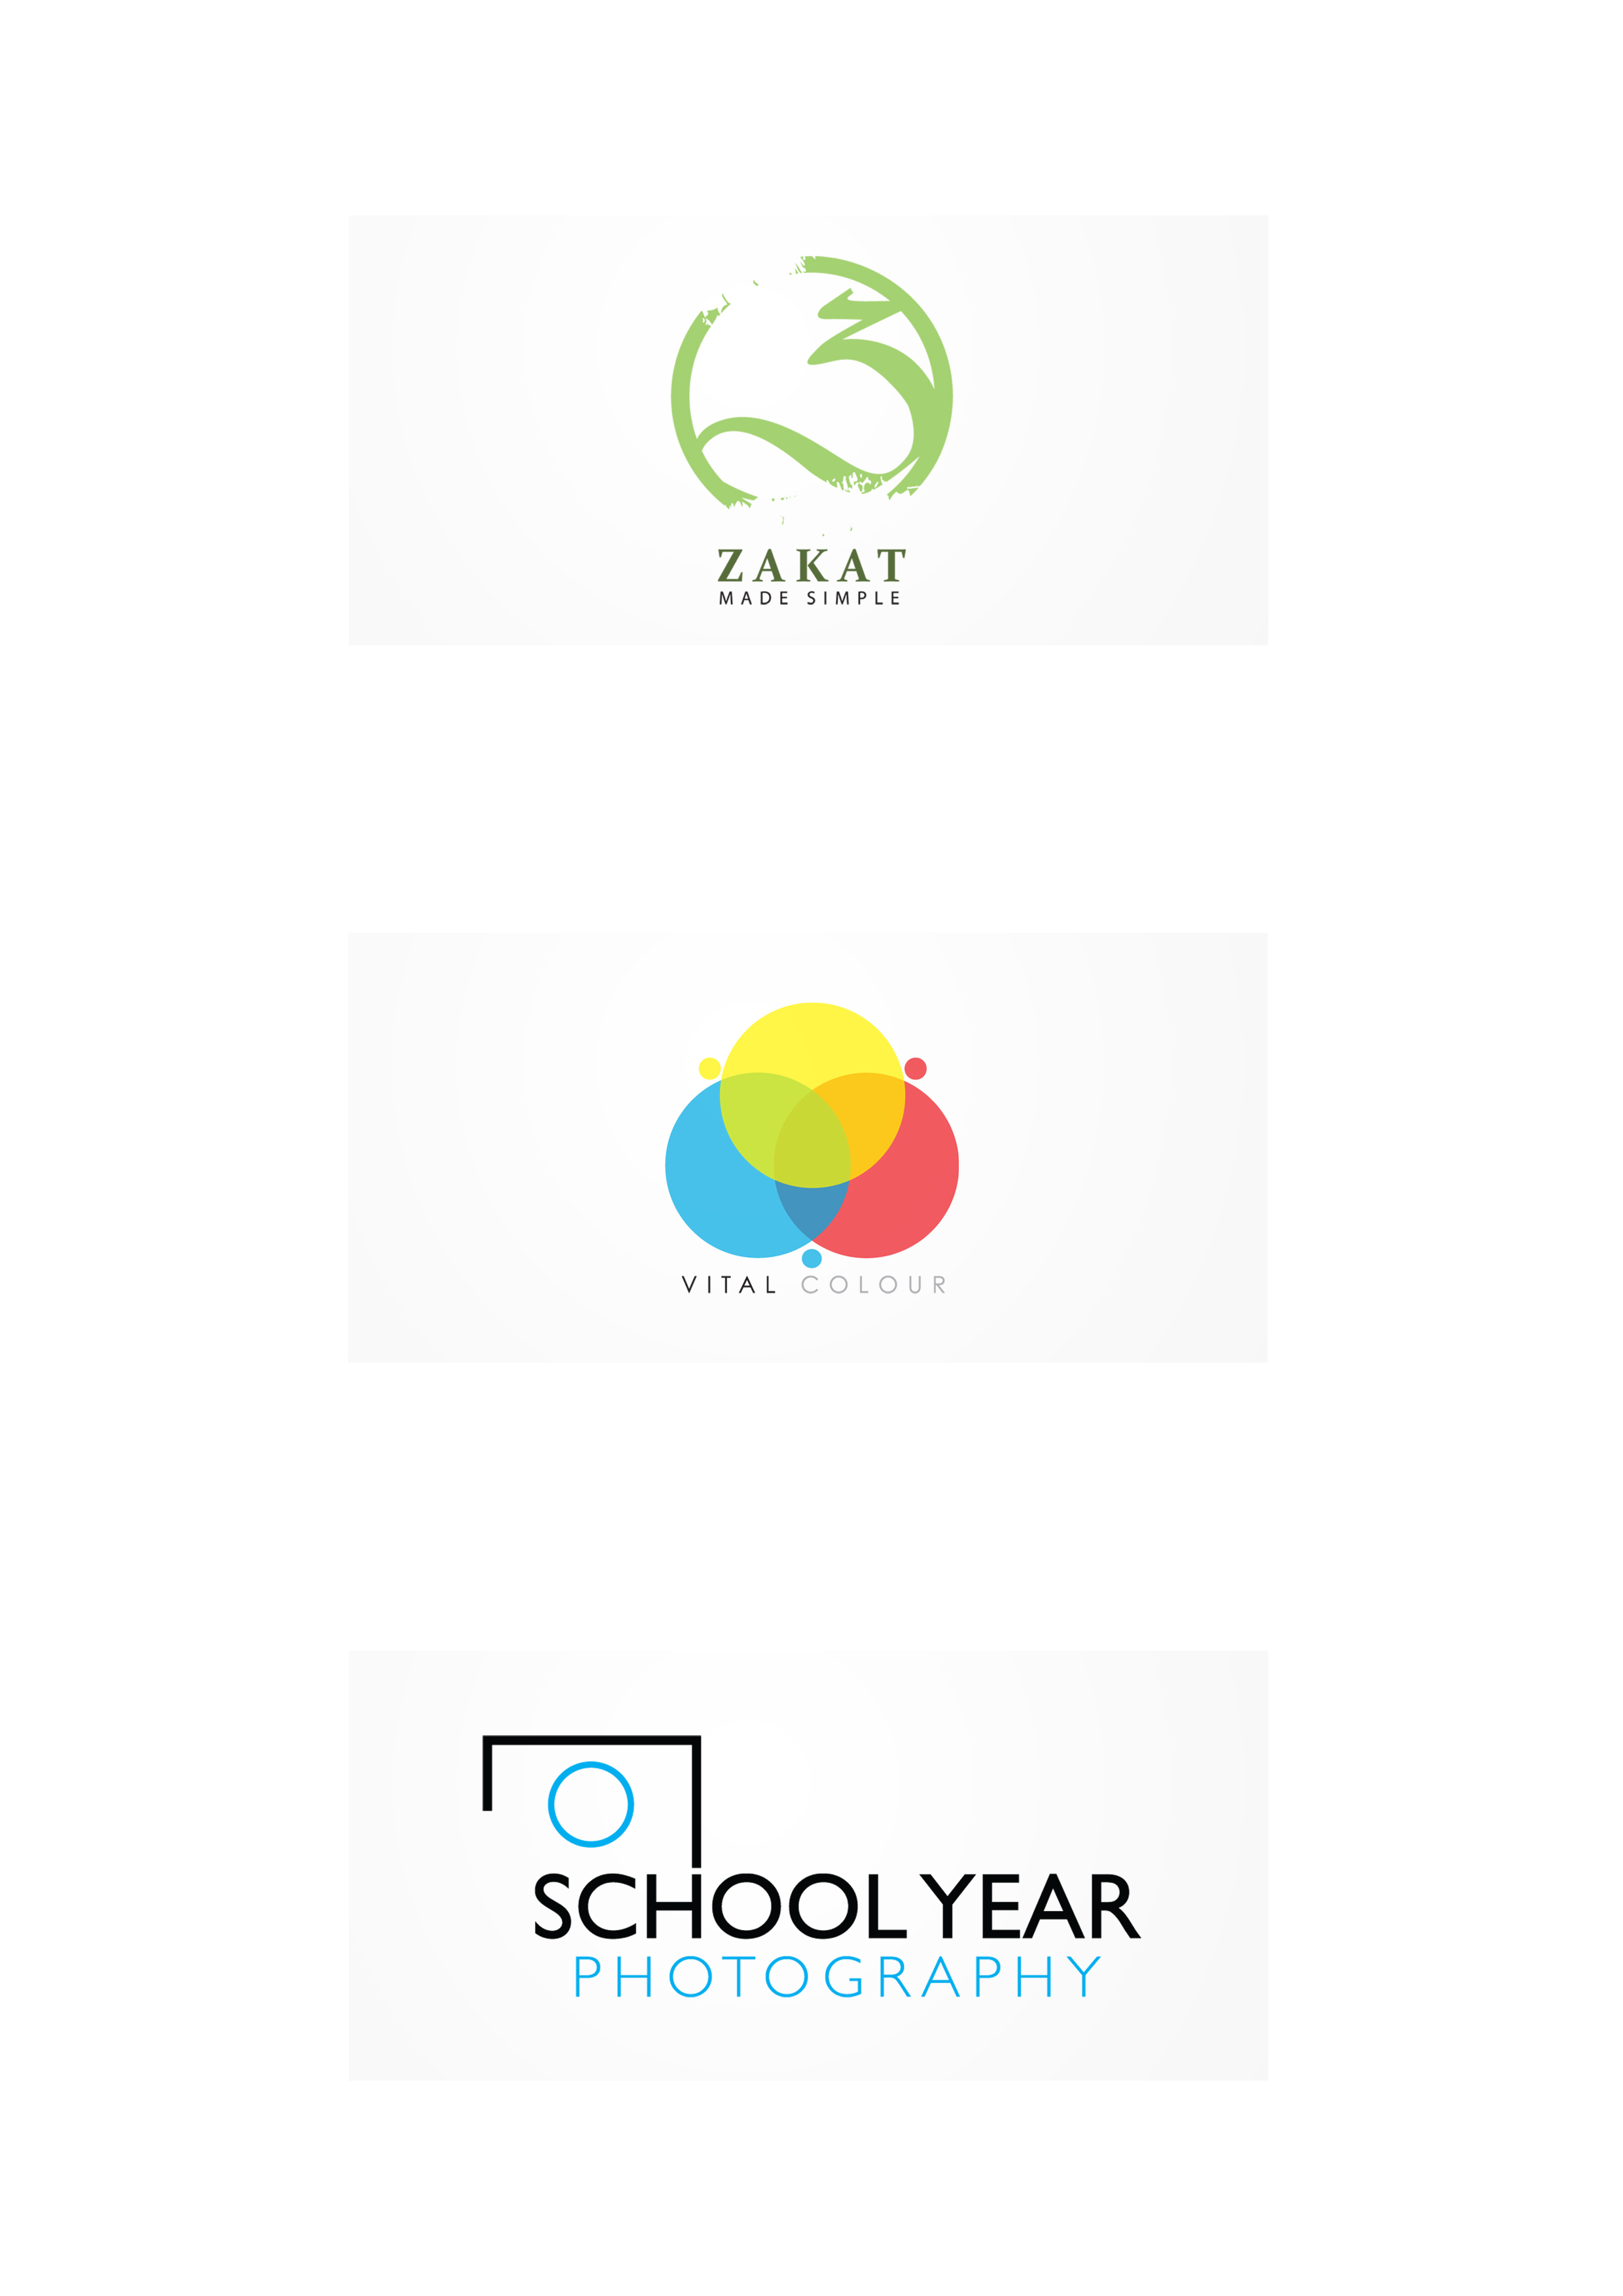 logo design 2 by mohammed s designs interfaces logos logotypes 2010 